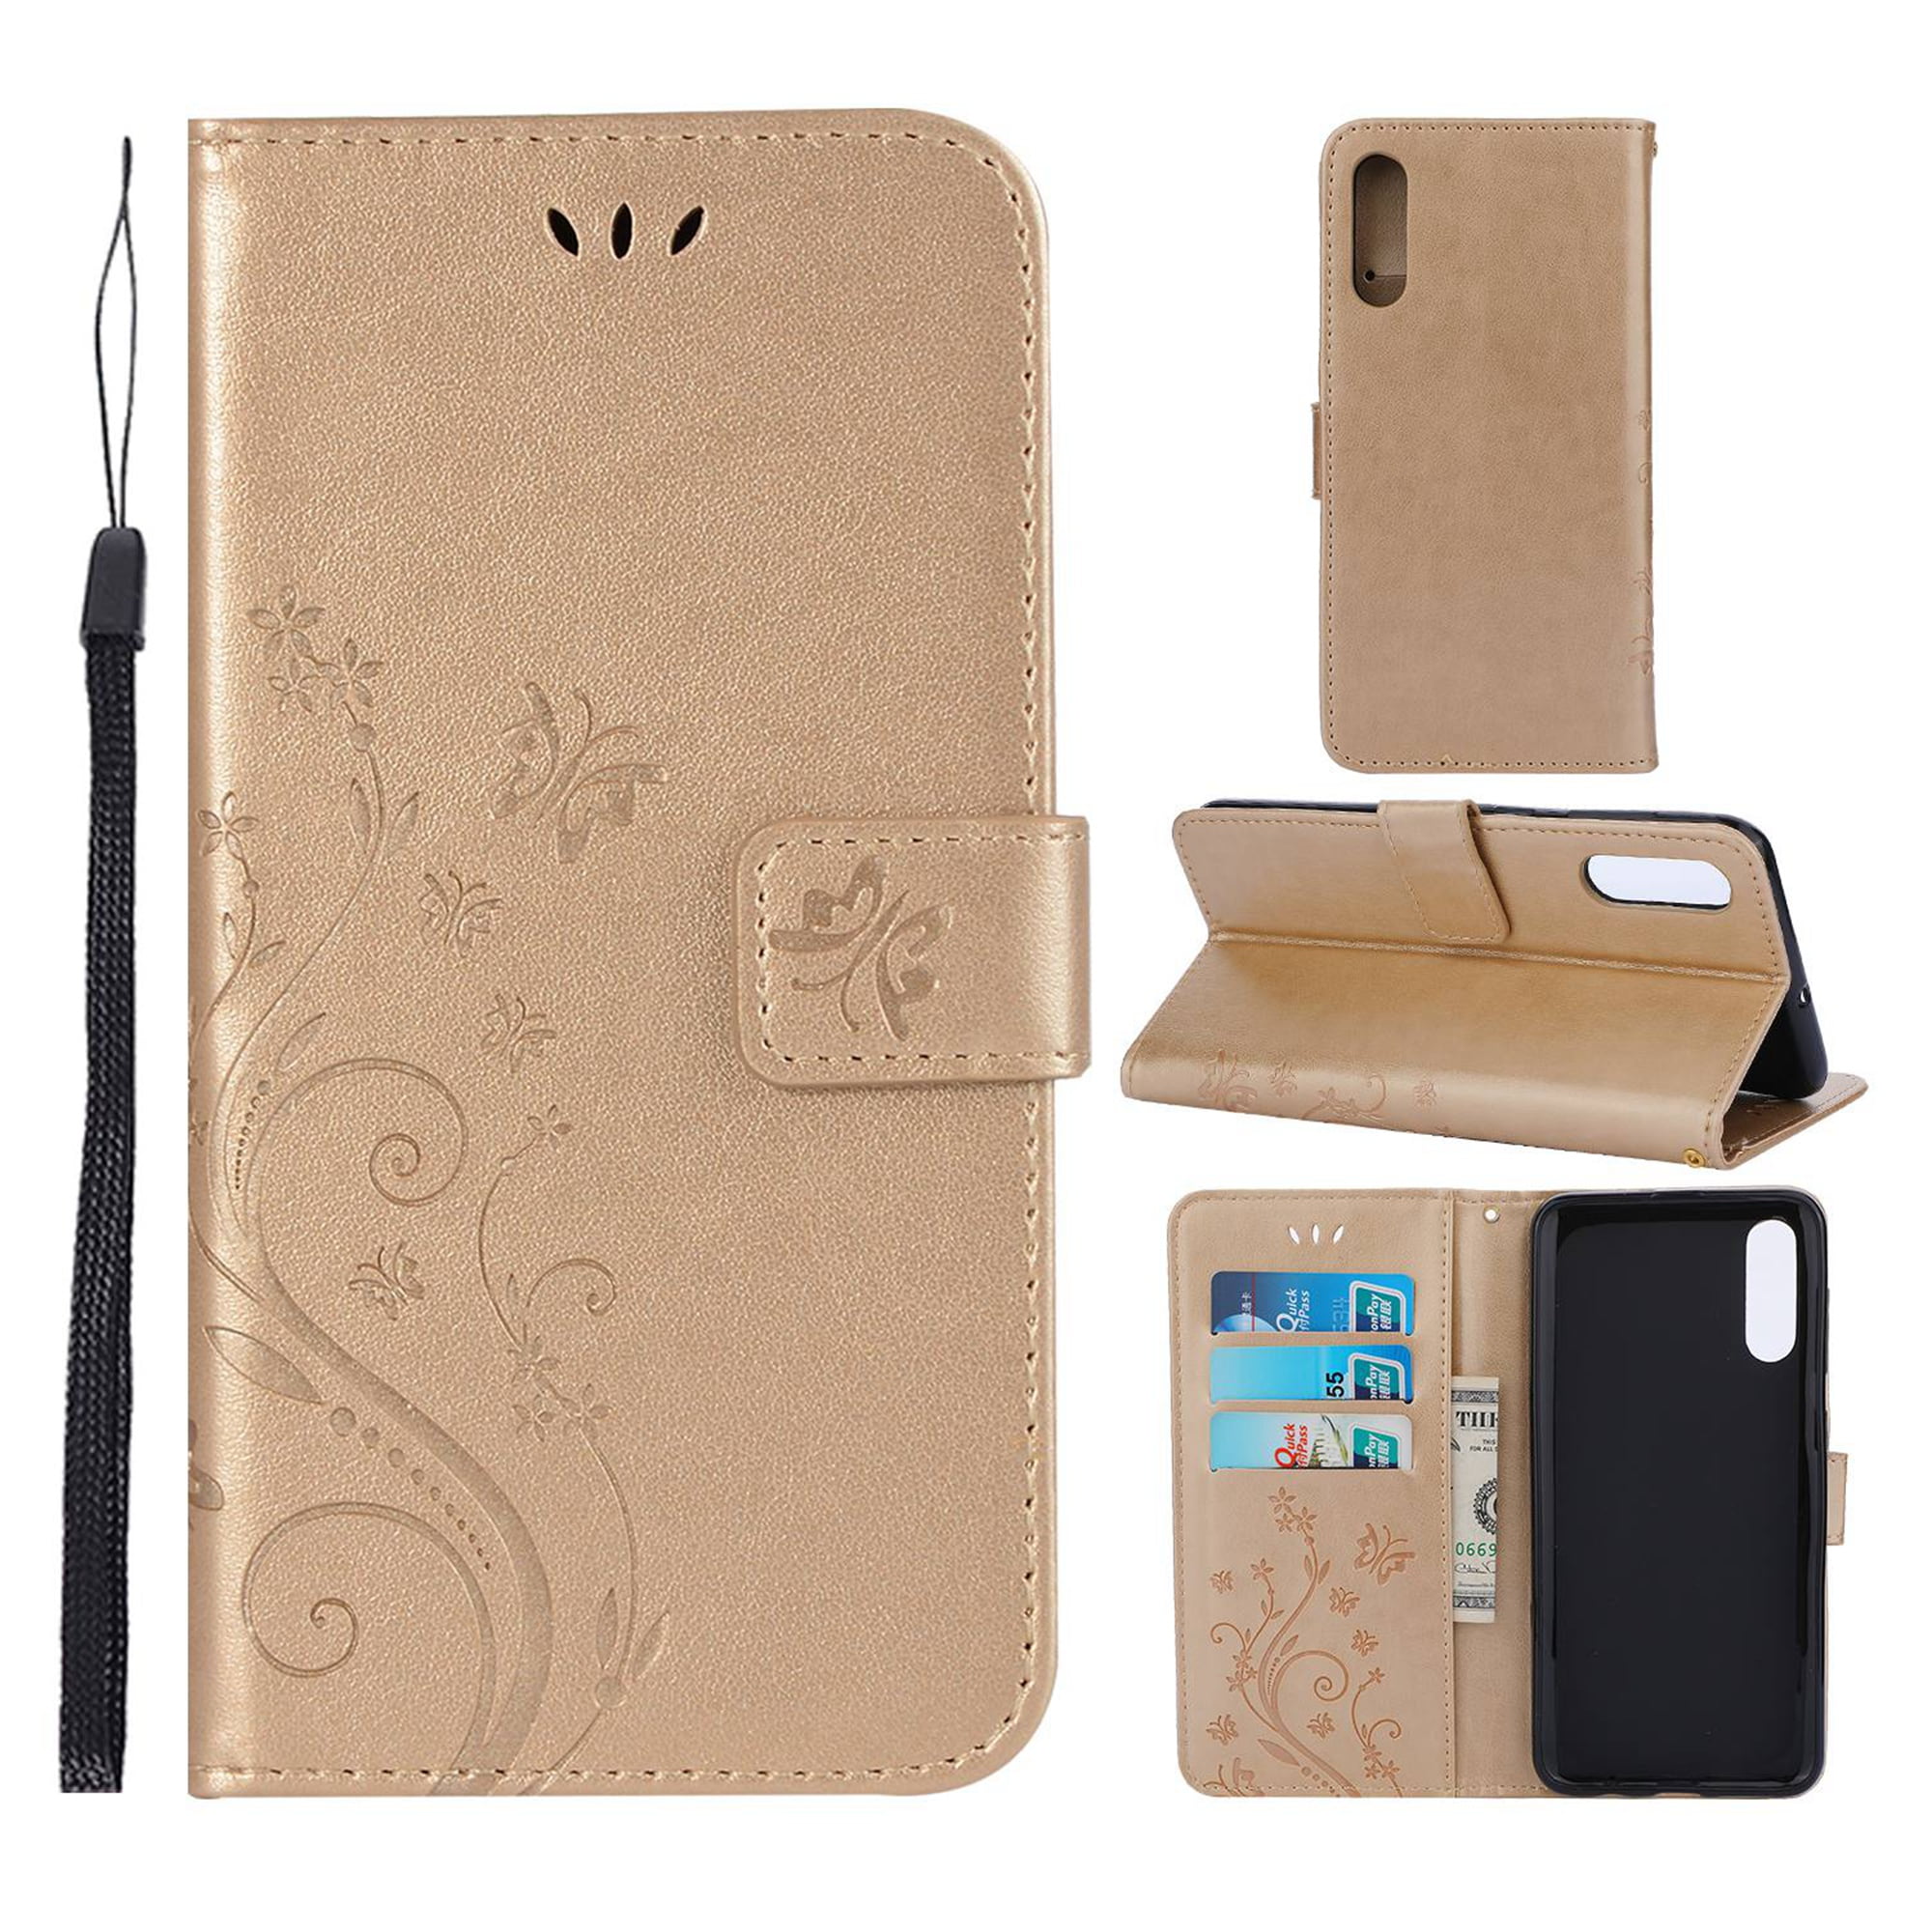 Brown PHEZEN Case for Samsung Galaxy A50 Wallet Case,Embossing Mandala Flower PU Leather Magnetic Folio Flip Case Full Body Protective Phone Case Cover with Stand Card Slot Wrist Strap 